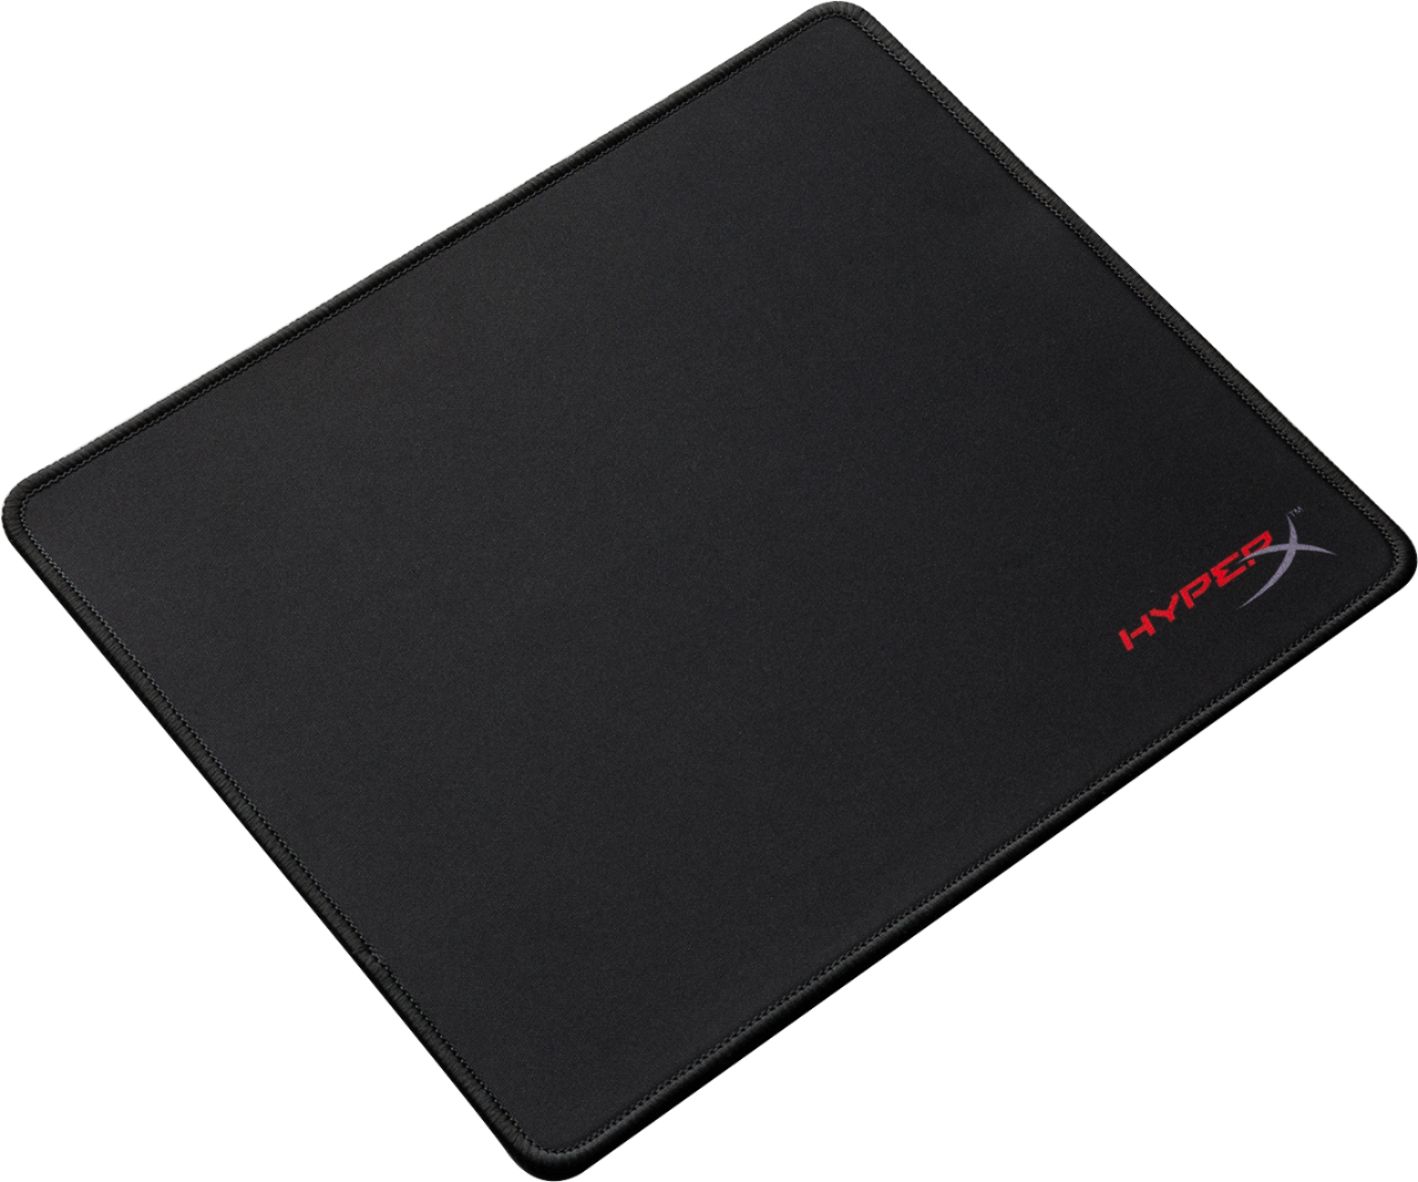 Best Buy: HyperX FURY S Pro Gaming Mouse Pad (Small) Black HX-MPFS-SM